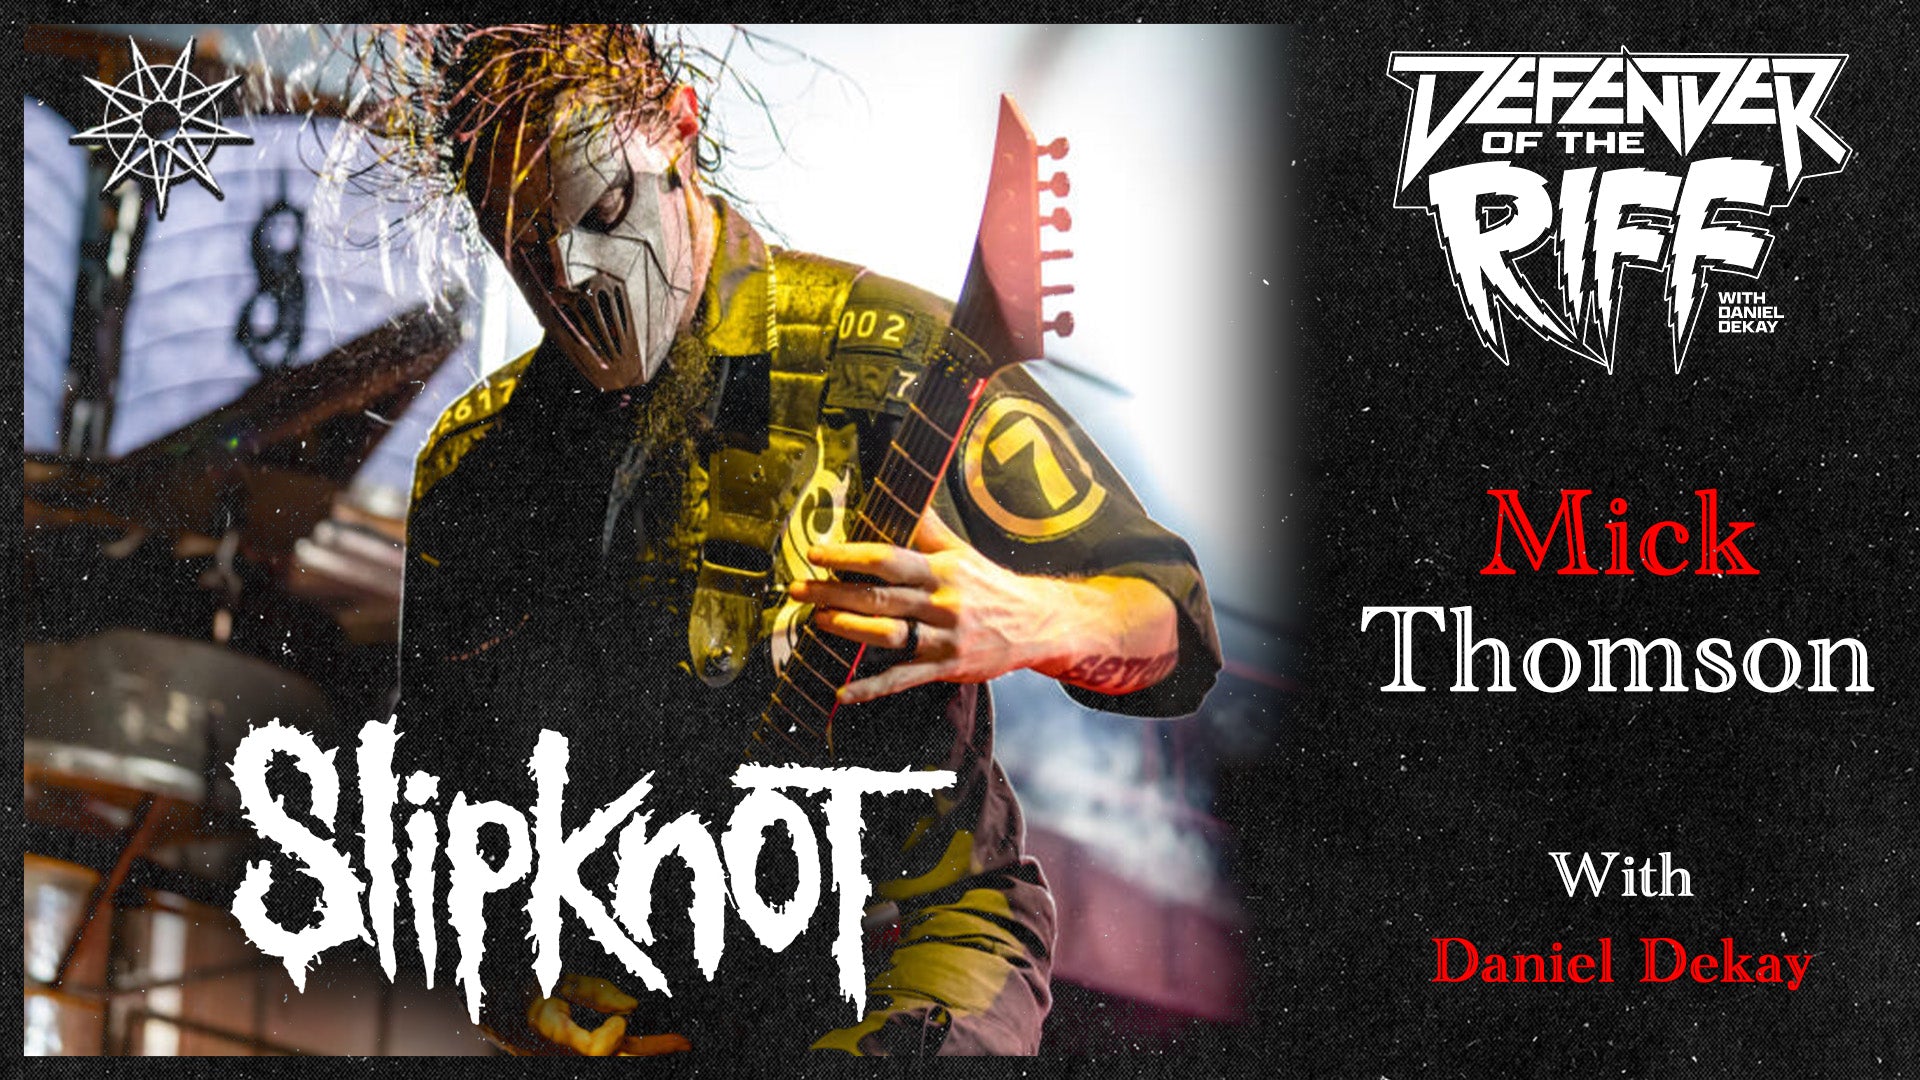 Slipknot are now playable characters in the mythological universe of S –  Knotfest